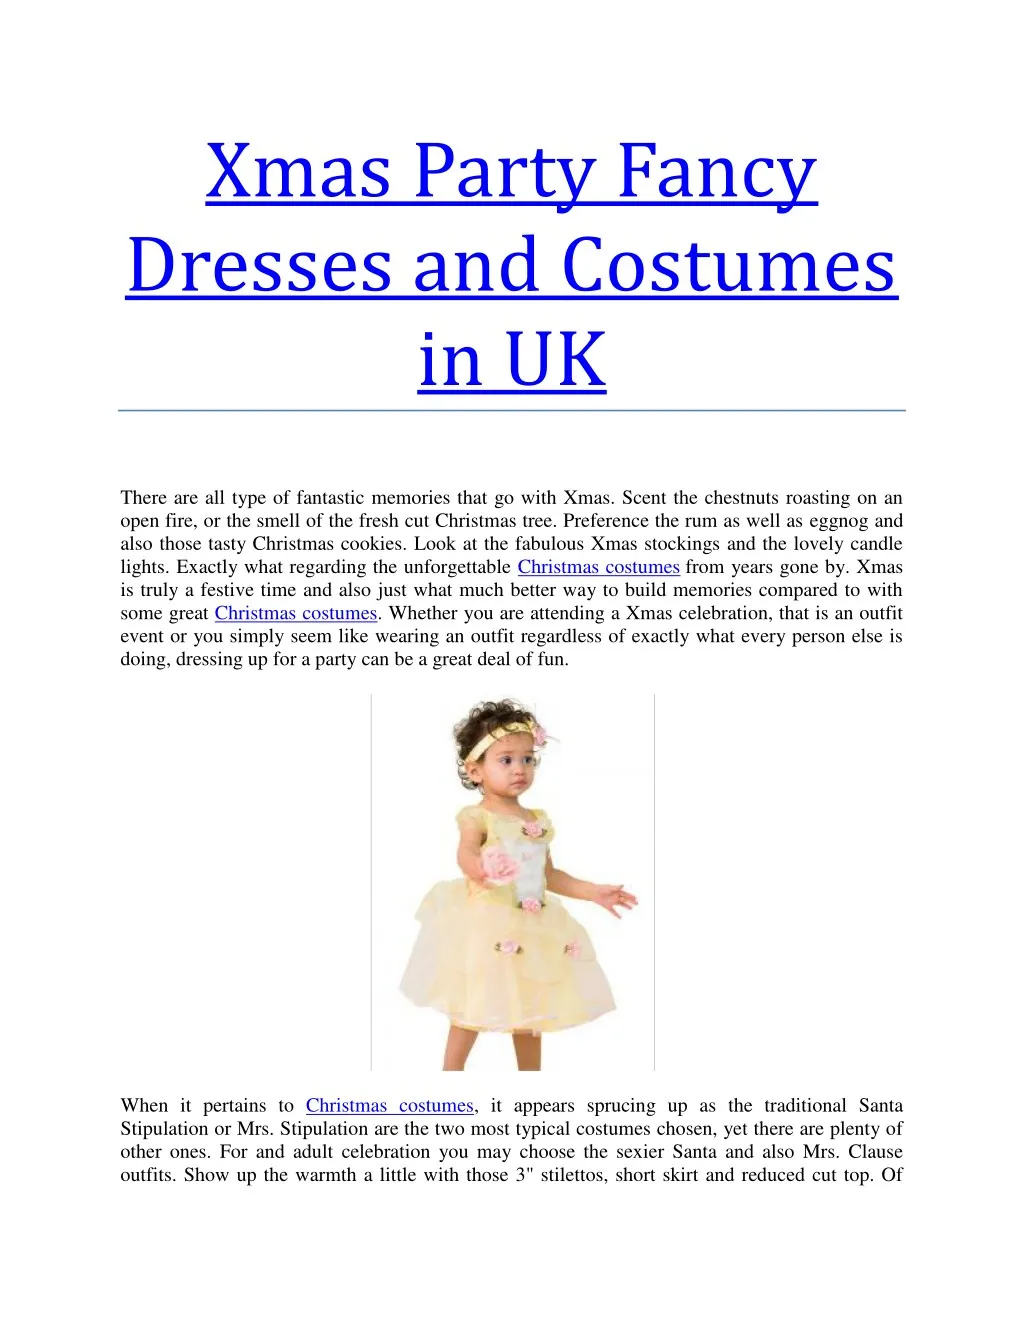 xmas party fancy dresses and costumes in uk